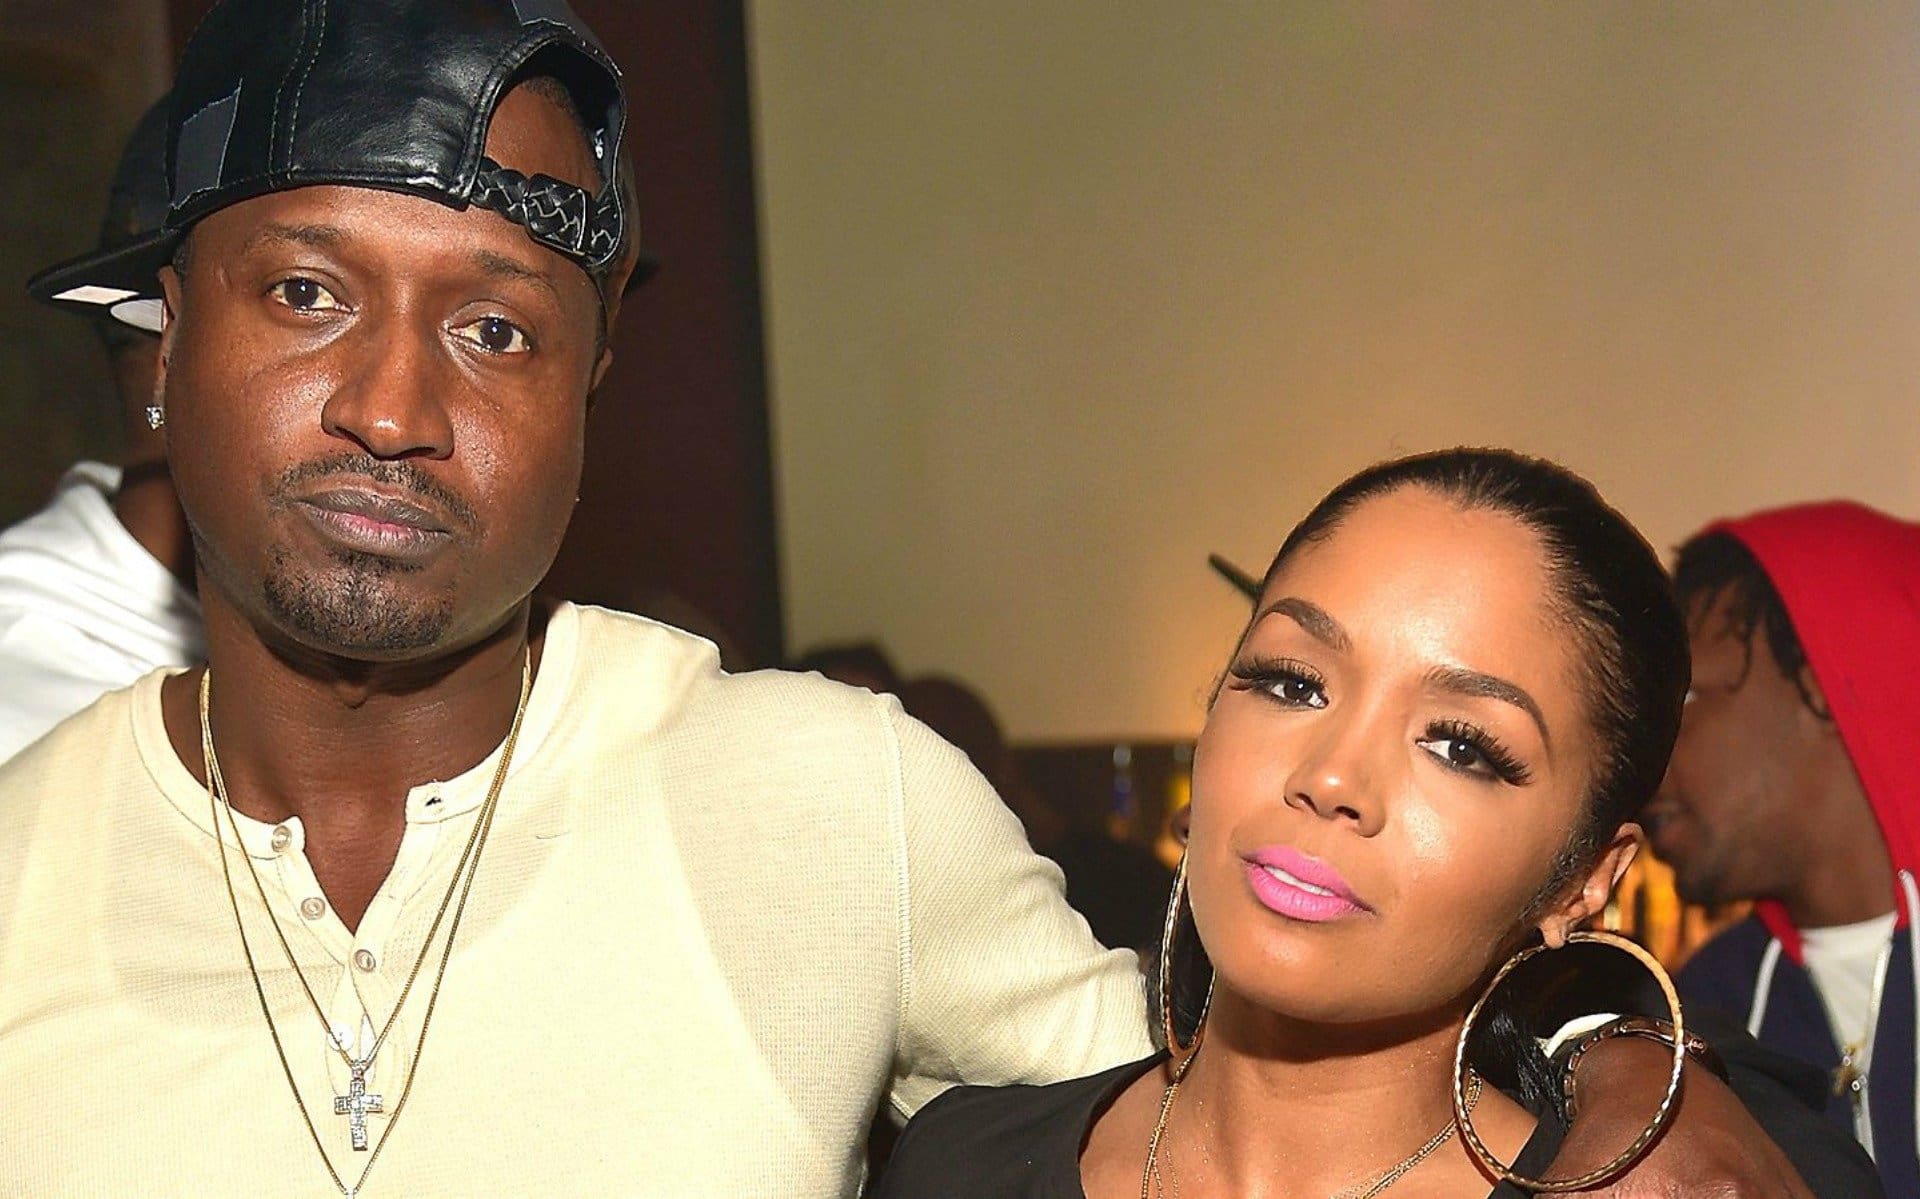 Rasheeda Frost Reveals A Tasty Surprise For Fans - Check Out The Video